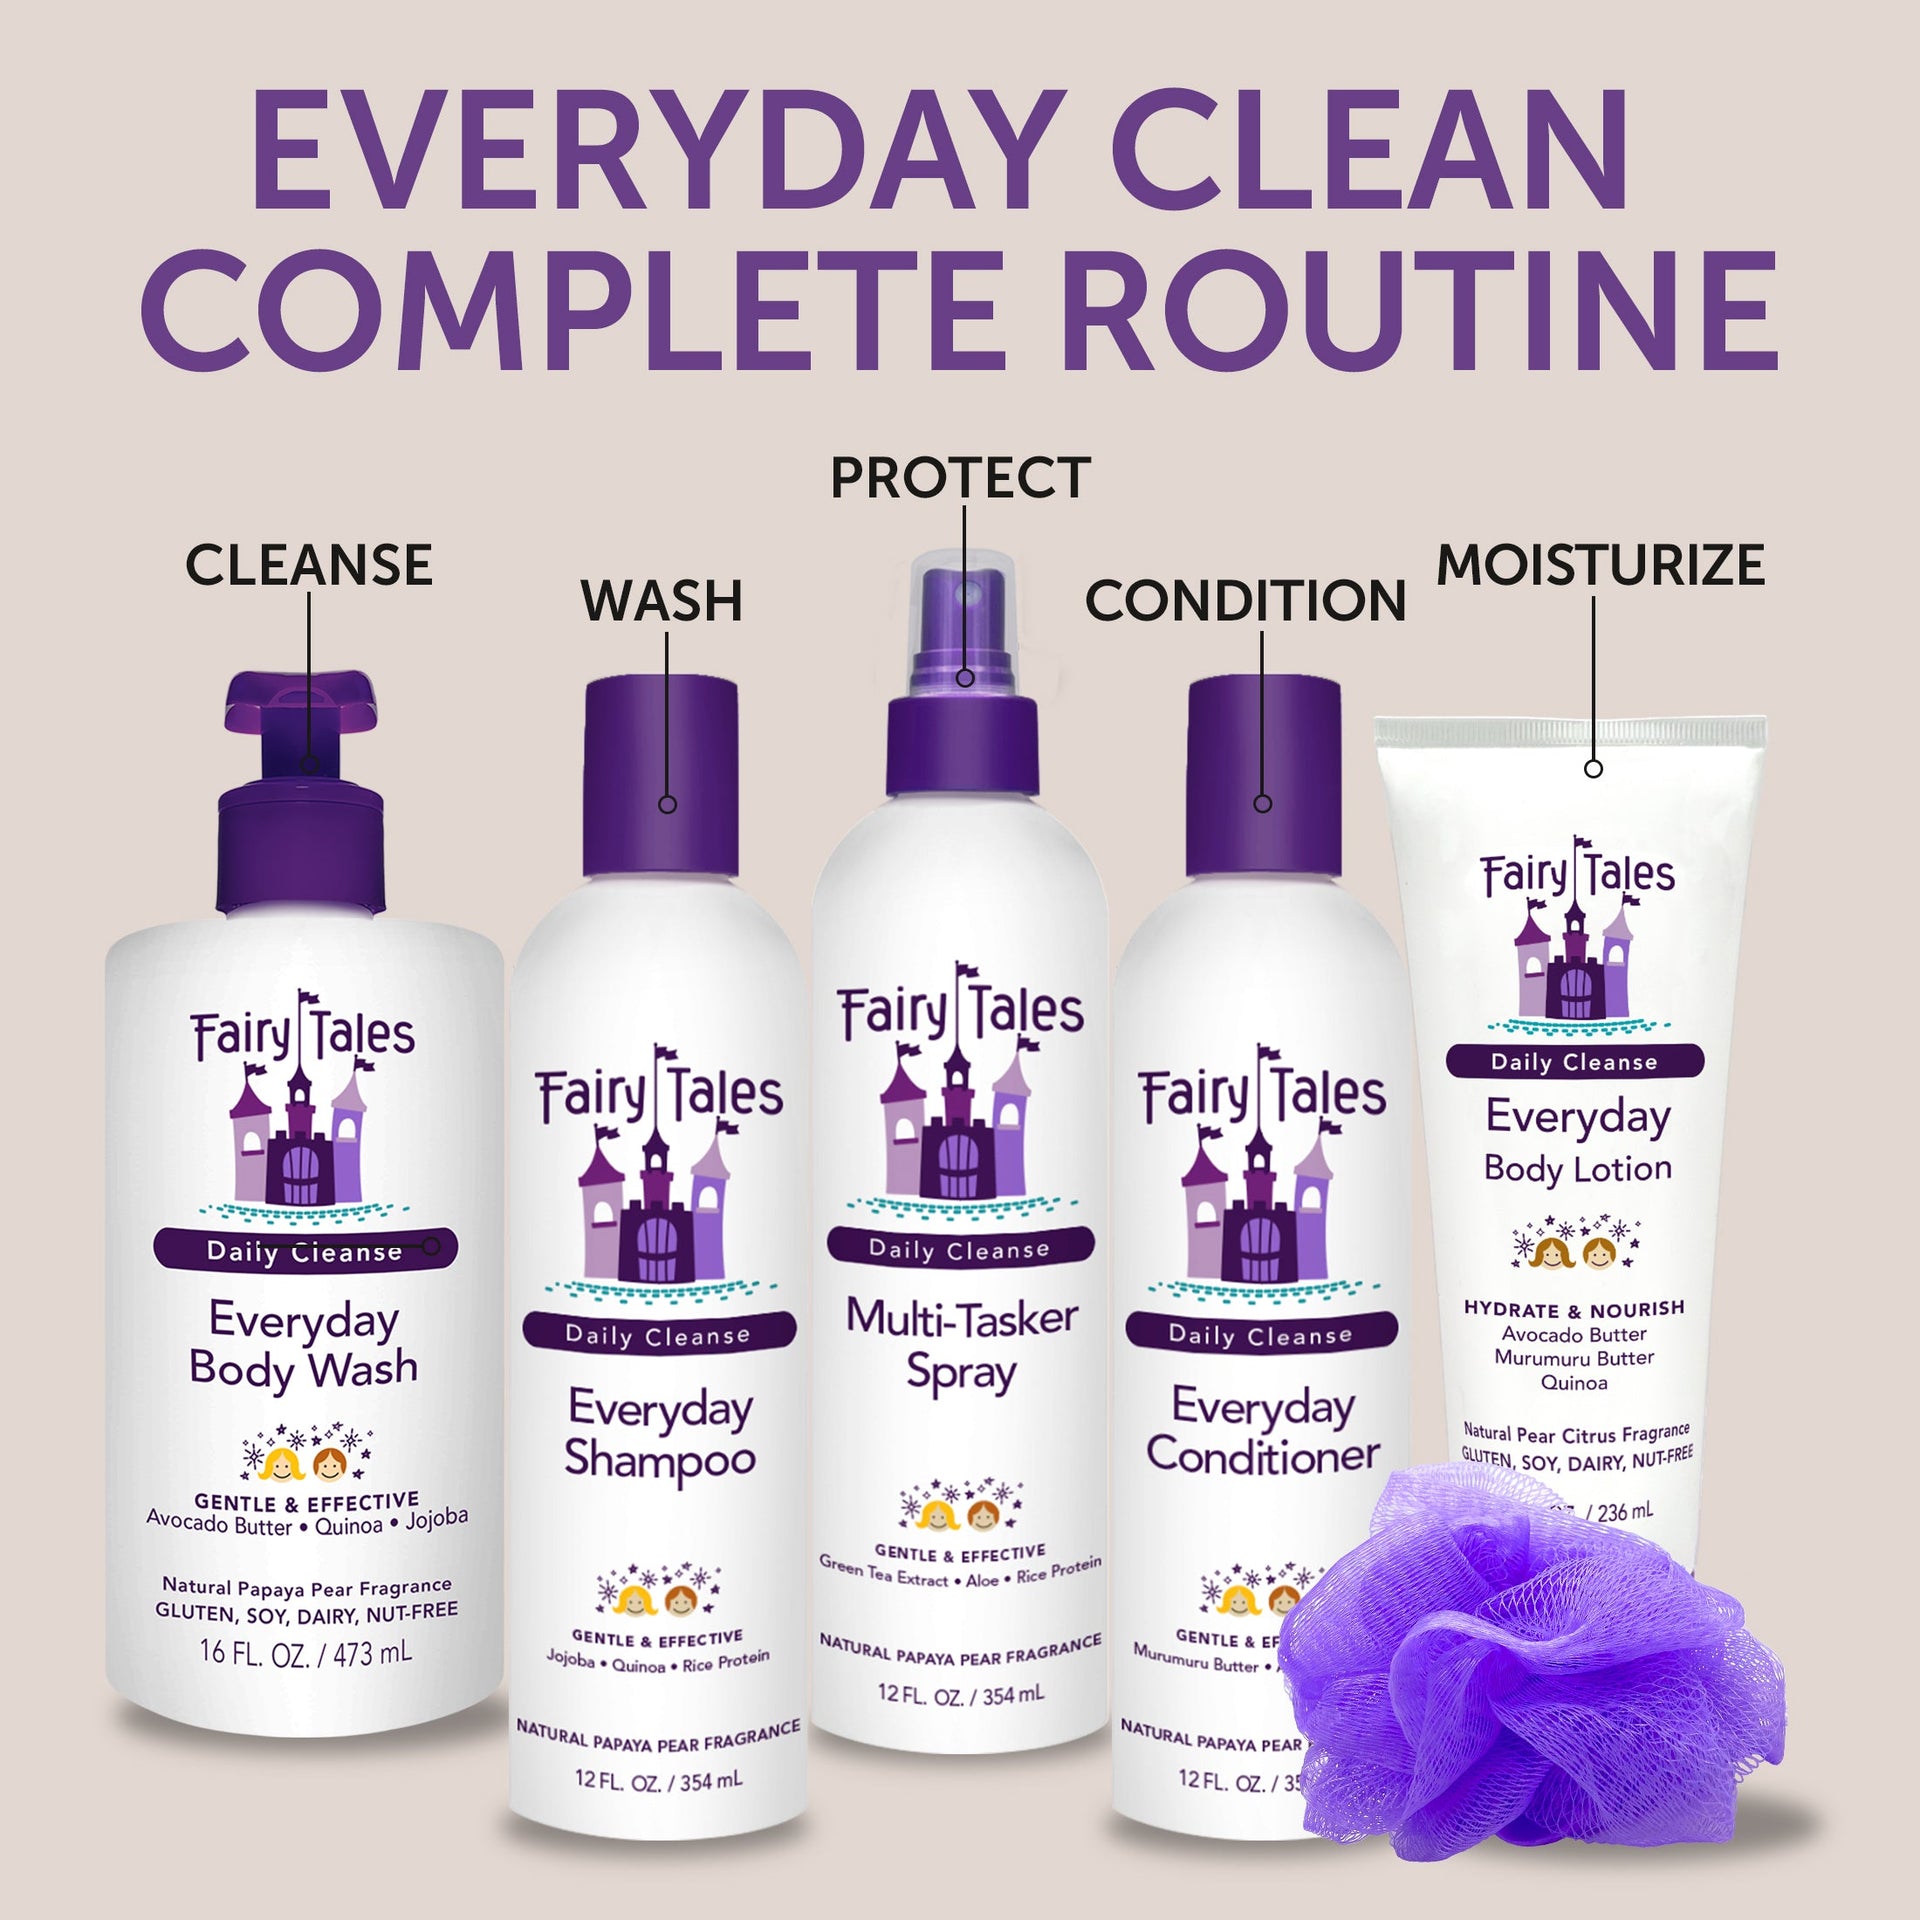 Daily Cleanse Kids Everyday Body Kit